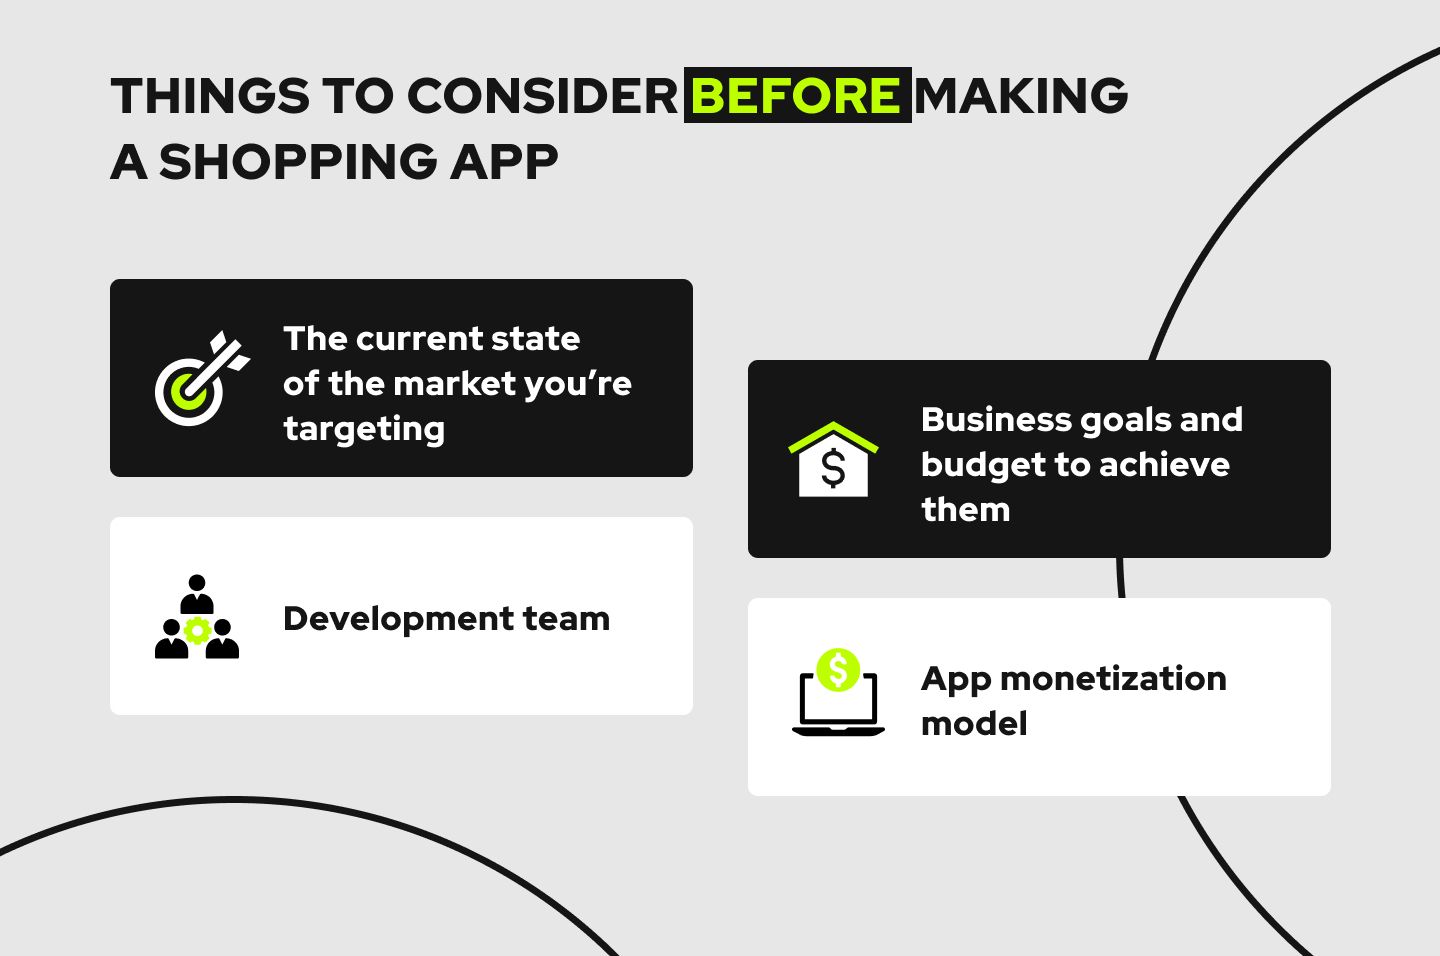 Things to consider before making a shopping app